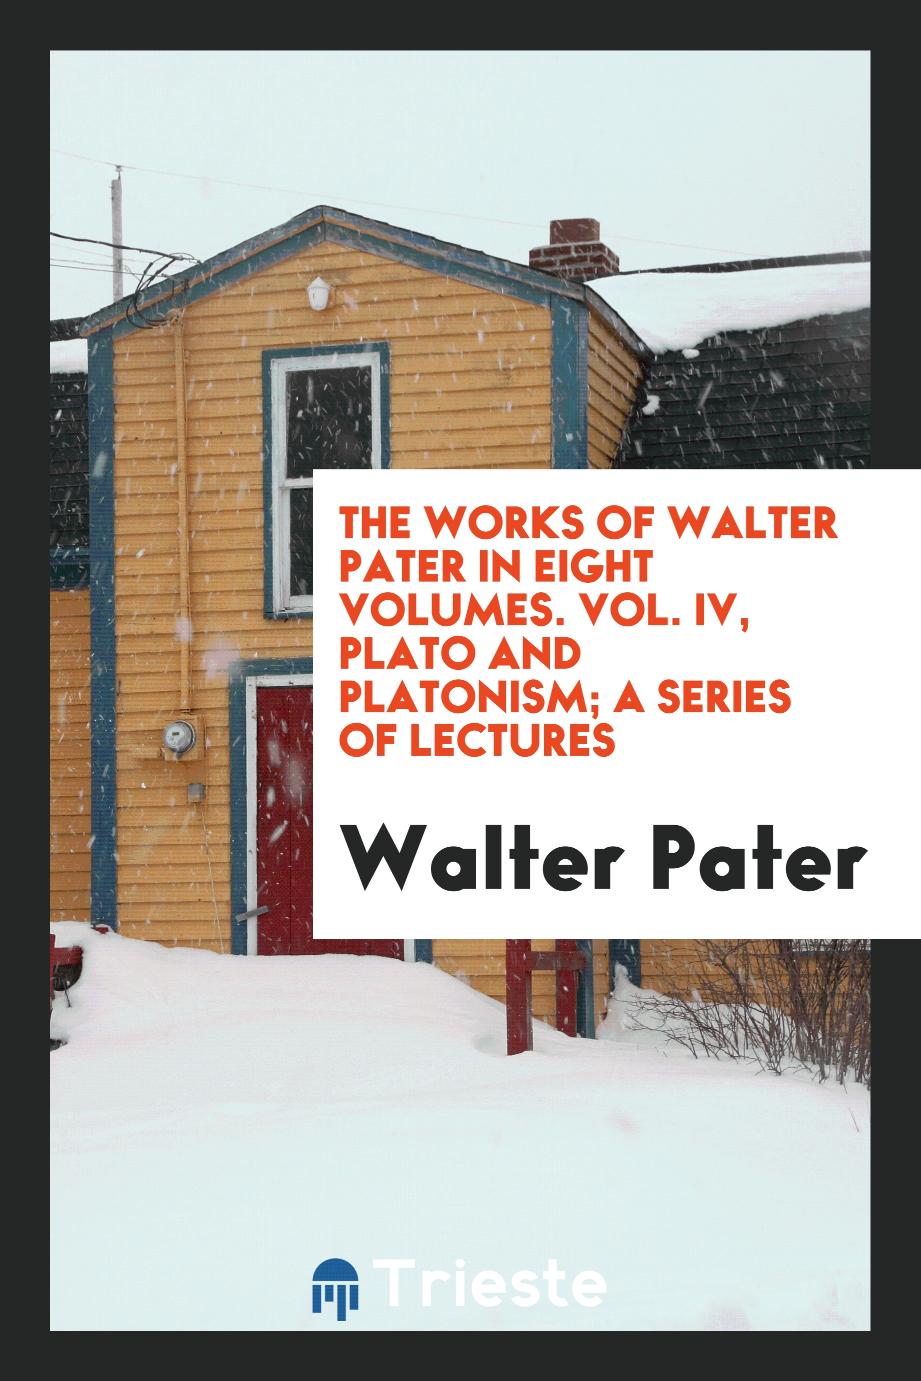 The Works of Walter Pater in Eight Volumes. Vol. IV, Plato and Platonism; A Series of Lectures